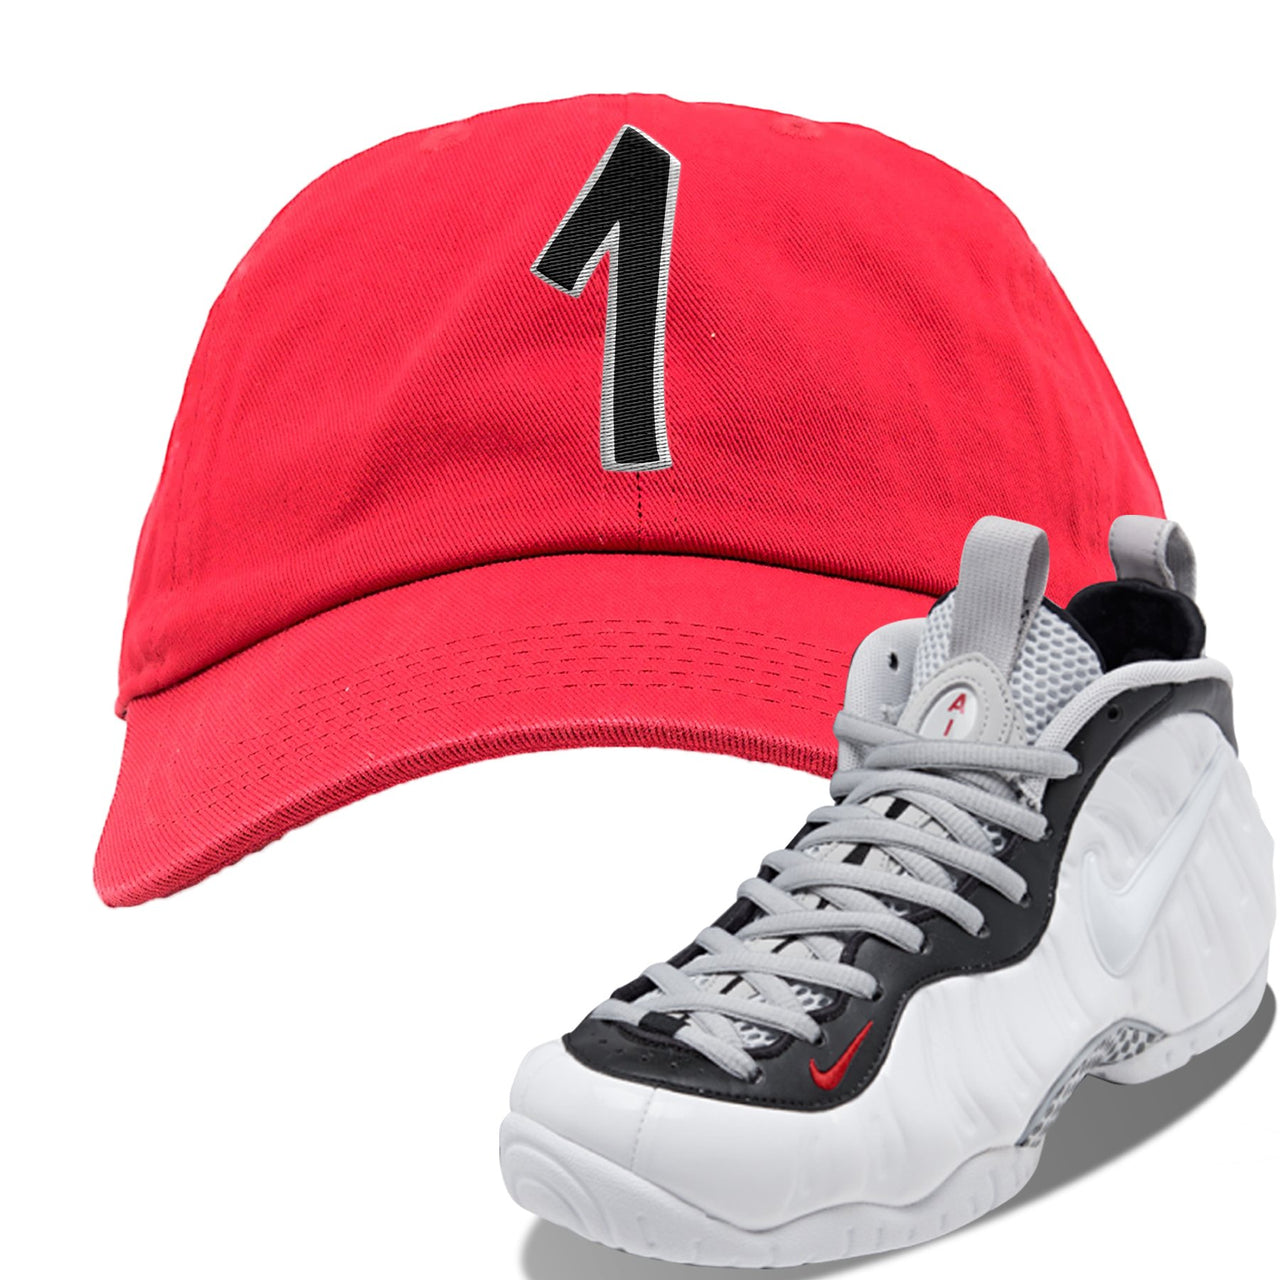 Foamposite Pro White Black University Red Sneaker Red Dad Hat | Hat to match Nike Air Foamposite Pro White Black University Red Shoes | Penny One